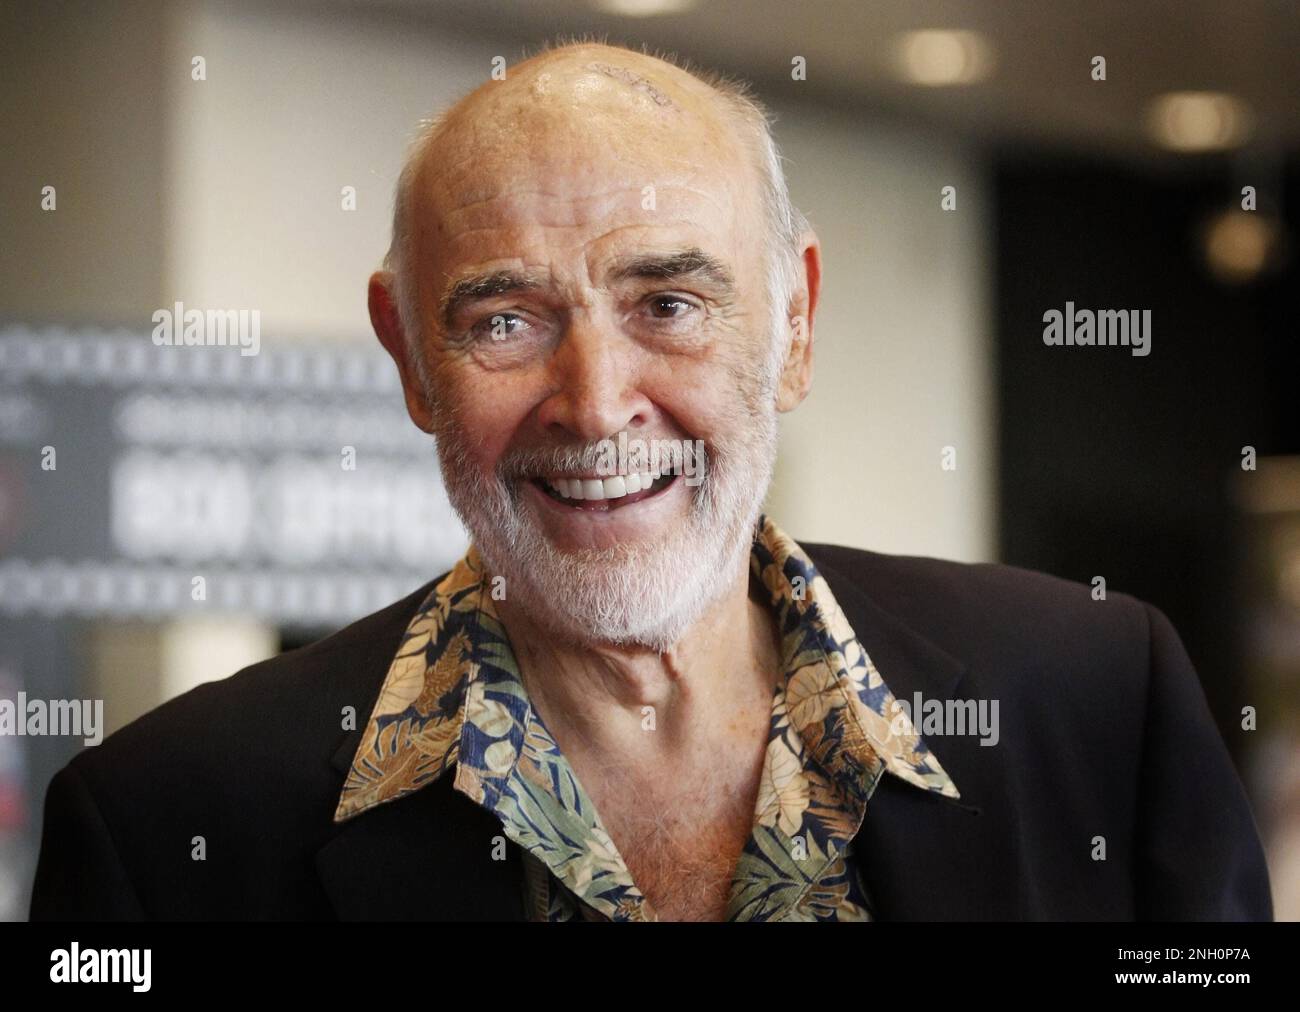 File photo dated 20/06/10 of Sir Sean Connery. A painting by the abstract artist Frantisek Kupka, owned by Mr Connery, is expected to fetch more than £2 million when it makes its auction debut next month. The rare work by the Czech painter, titled Complexe, was acquired by the James Bond star in 2016 before he died in 2020 aged 90. Issue date: Monday February 20, 2023. Stock Photo